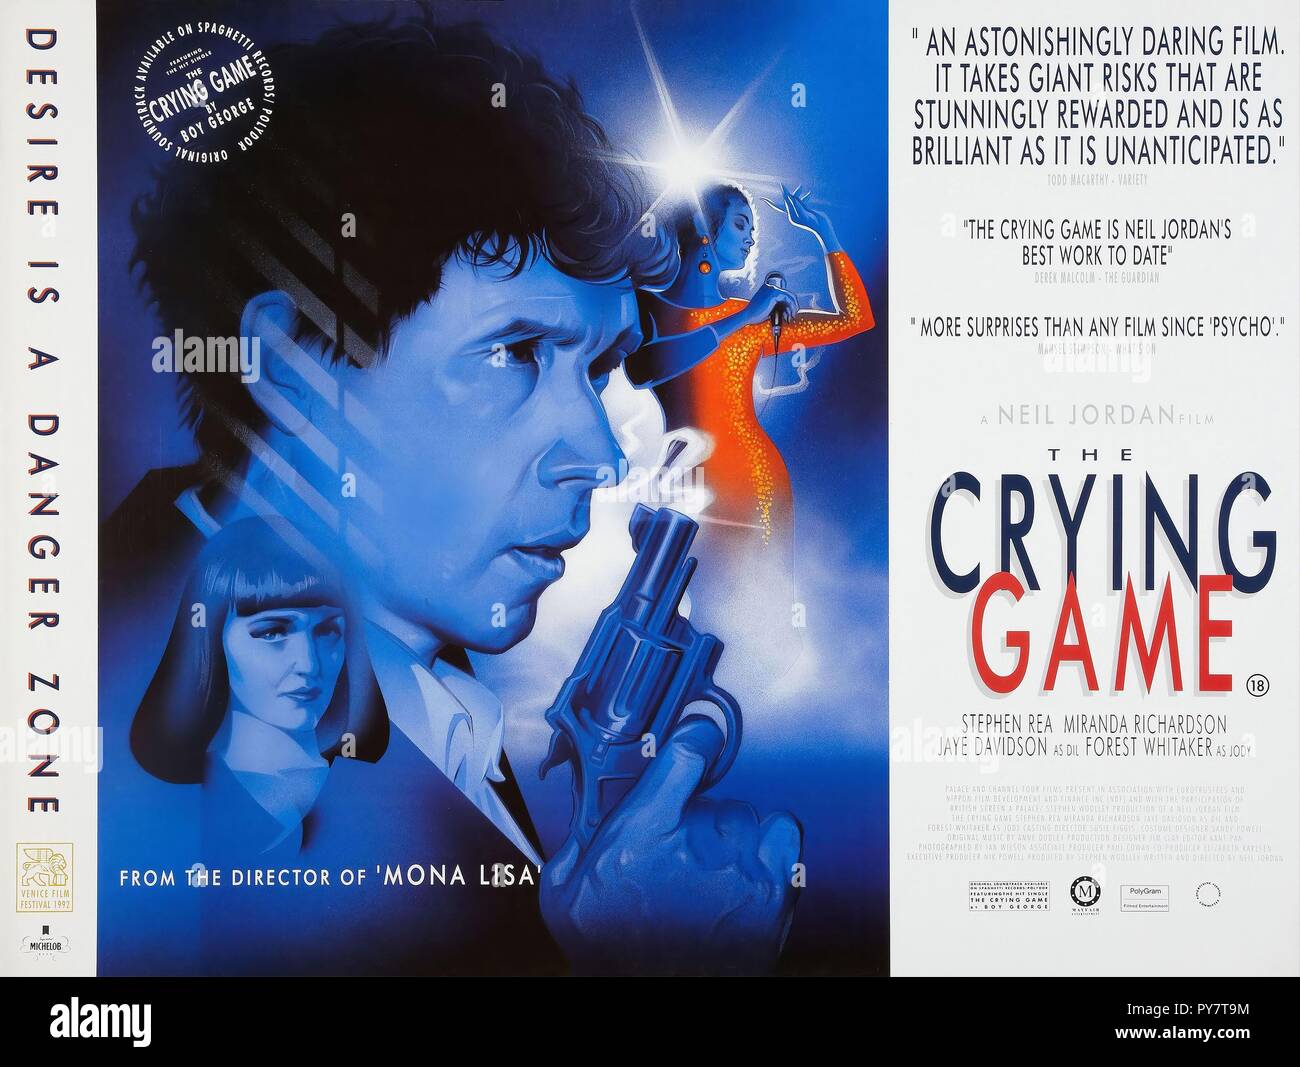 Original film title: THE CRYING GAME. English title: THE CRYING GAME. Year: 1992. Director: NEIL JORDAN. Credit: PALACE PICTURES / Album Stock Photo